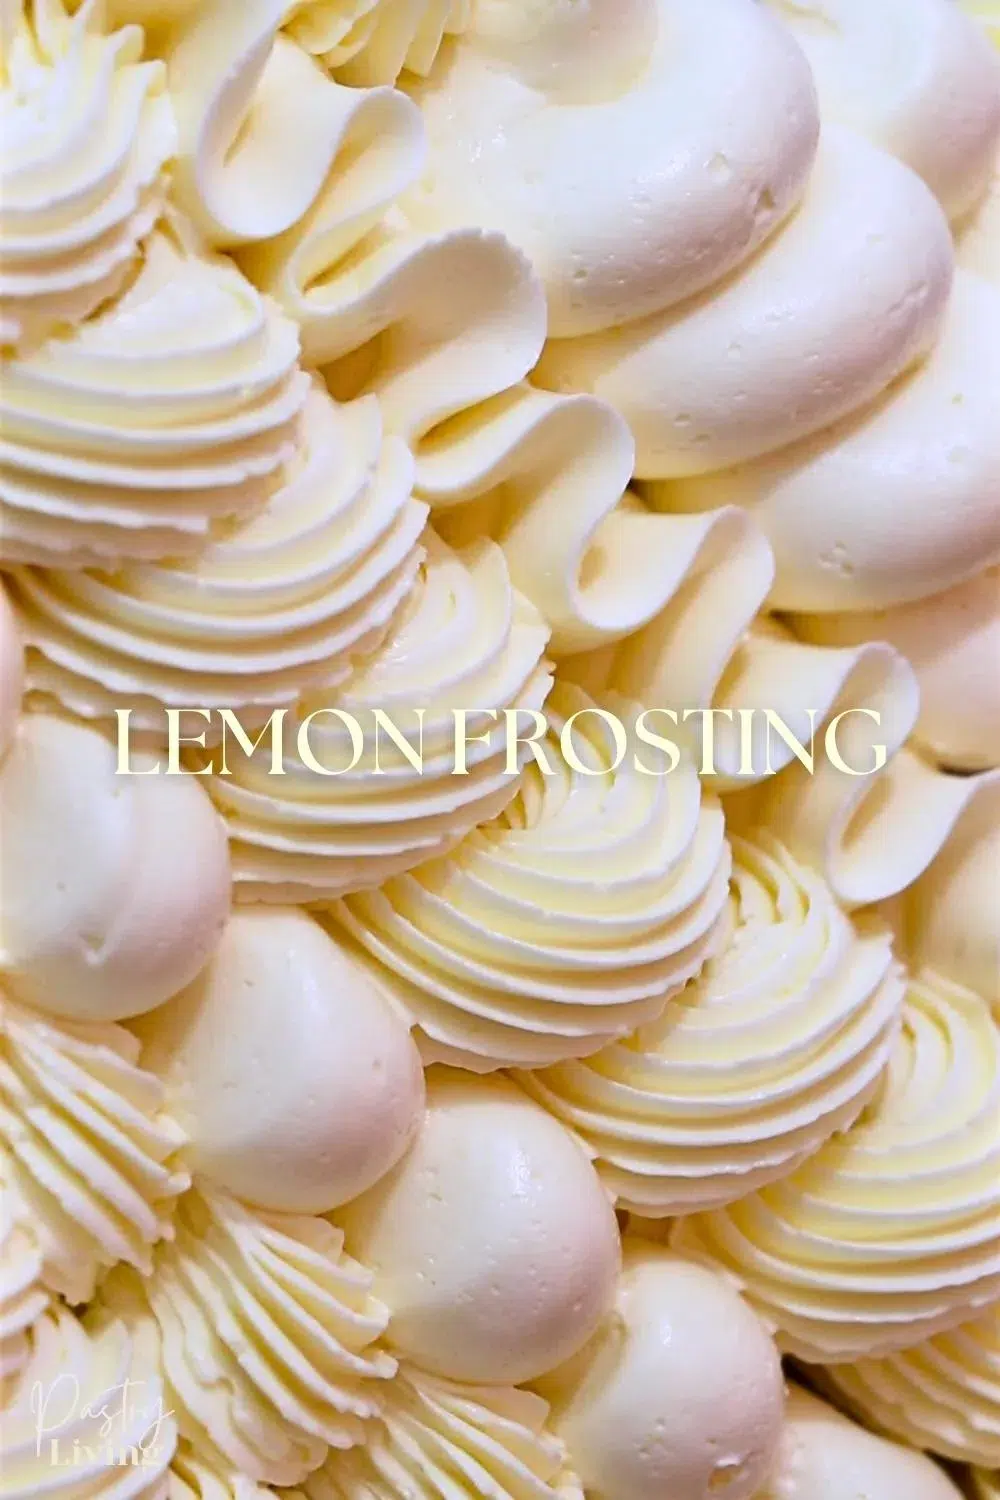 beautifully piped lemon frosting